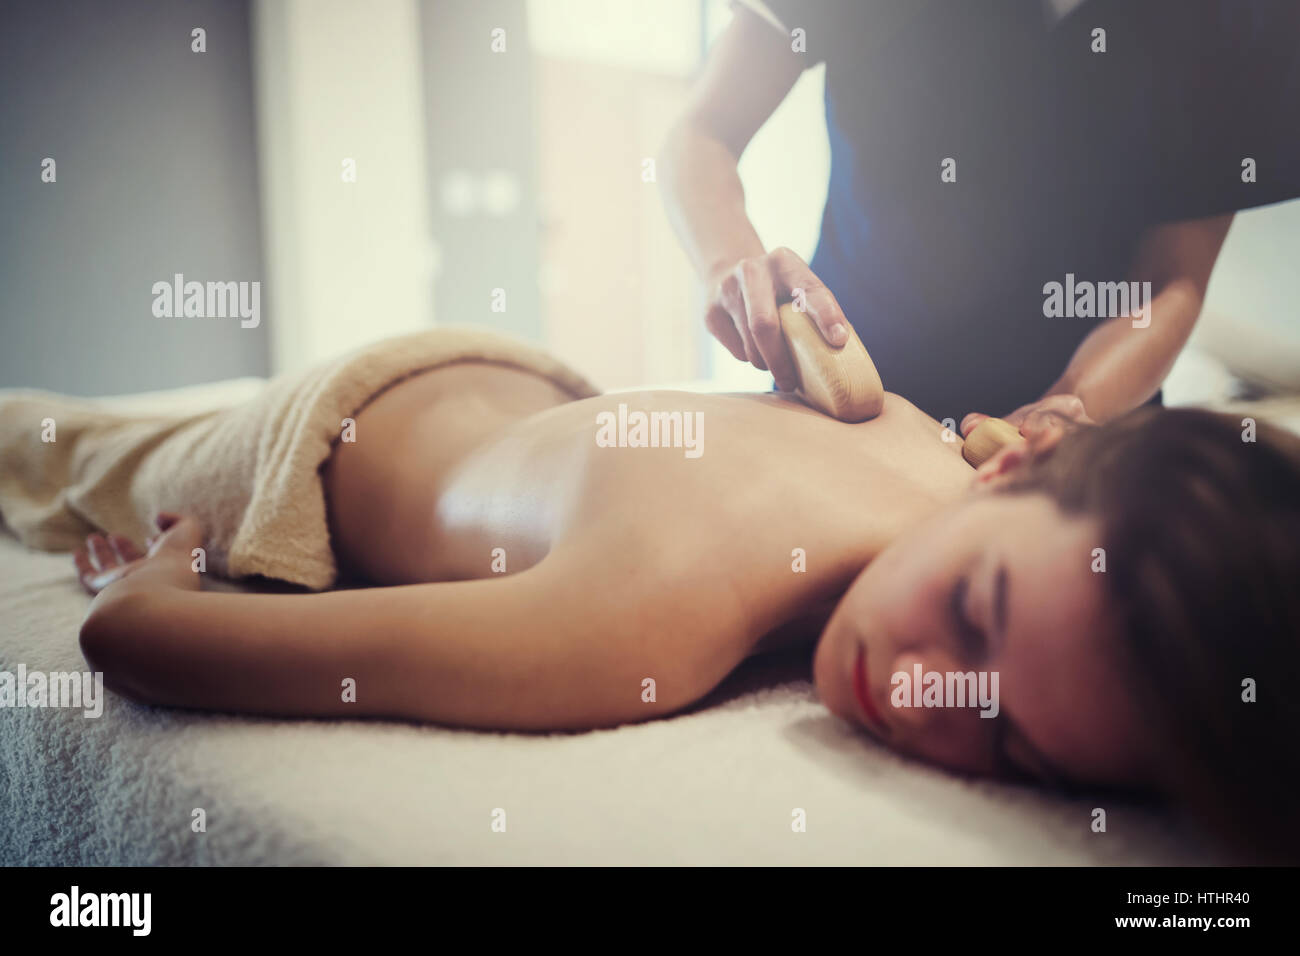 Masseur massaging female on bed while she relaxes Stock Photo